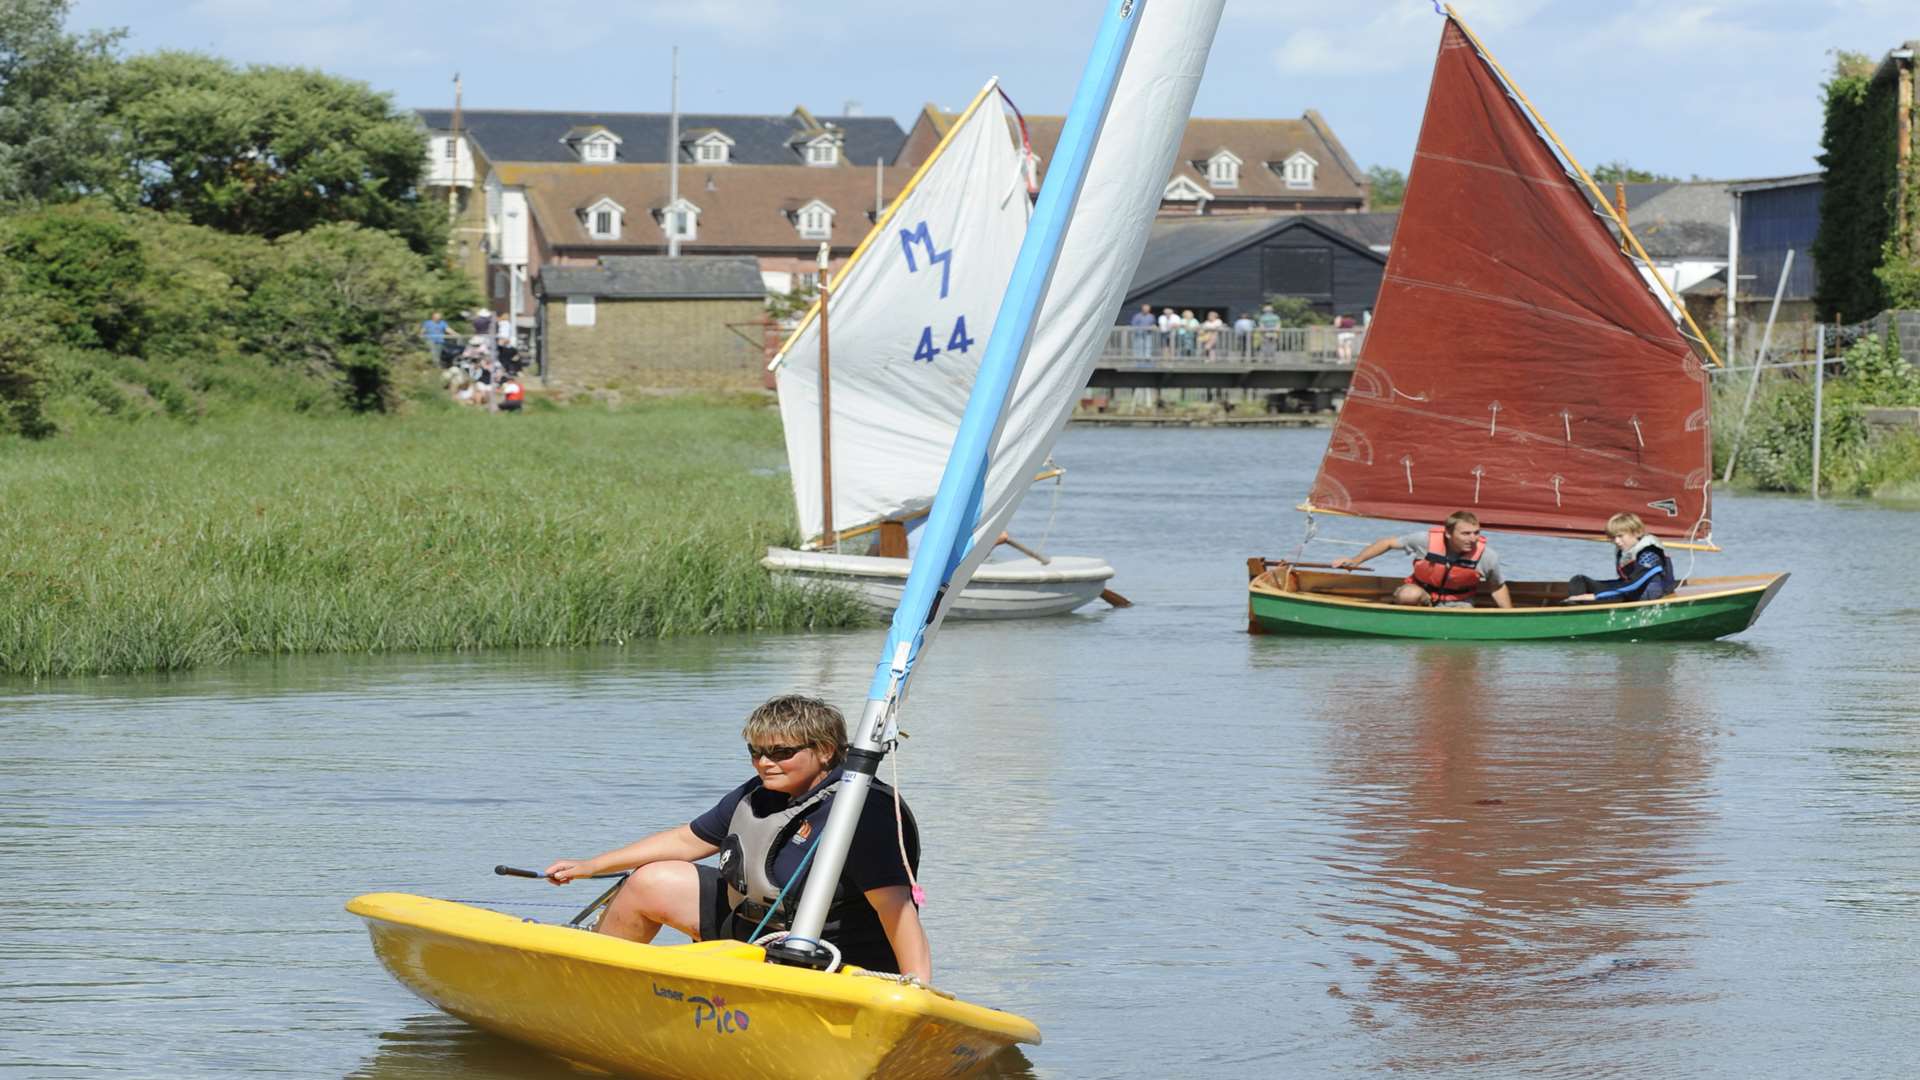 Messing about on the water at Faversham Creek